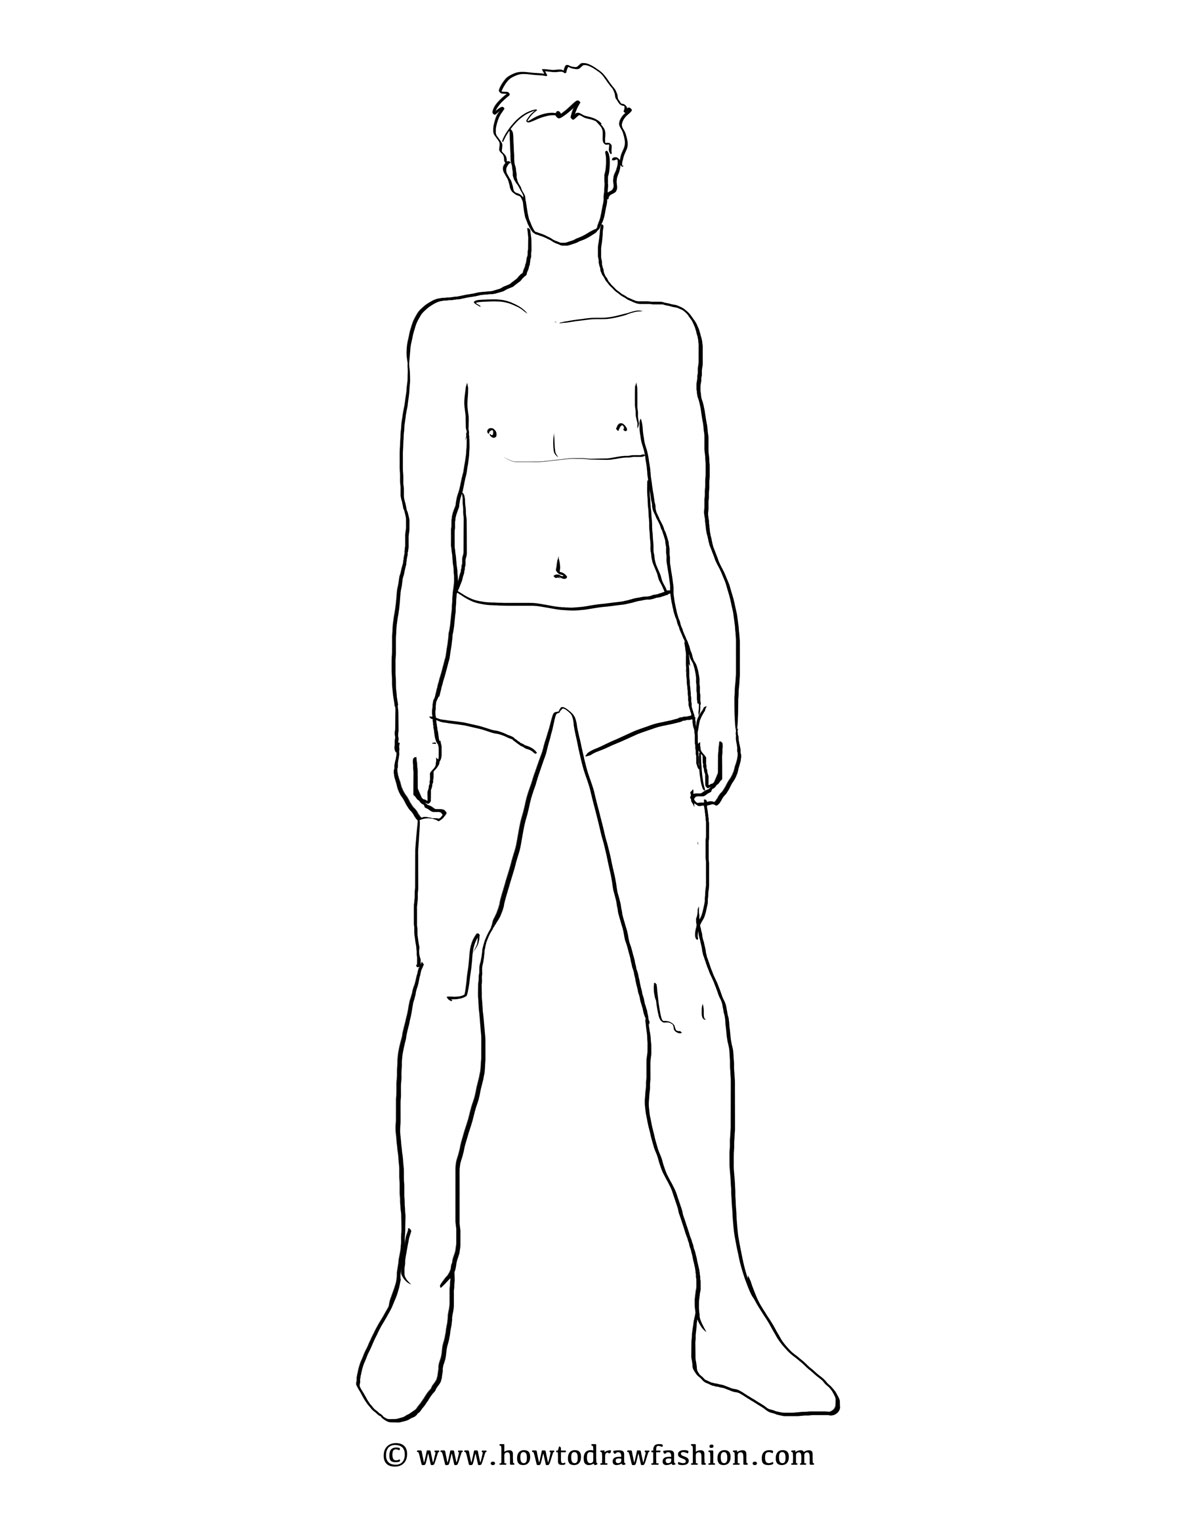 Male Body Drawing Template At Paintingvalley Com Explore Collection Of Male Body Drawing Template